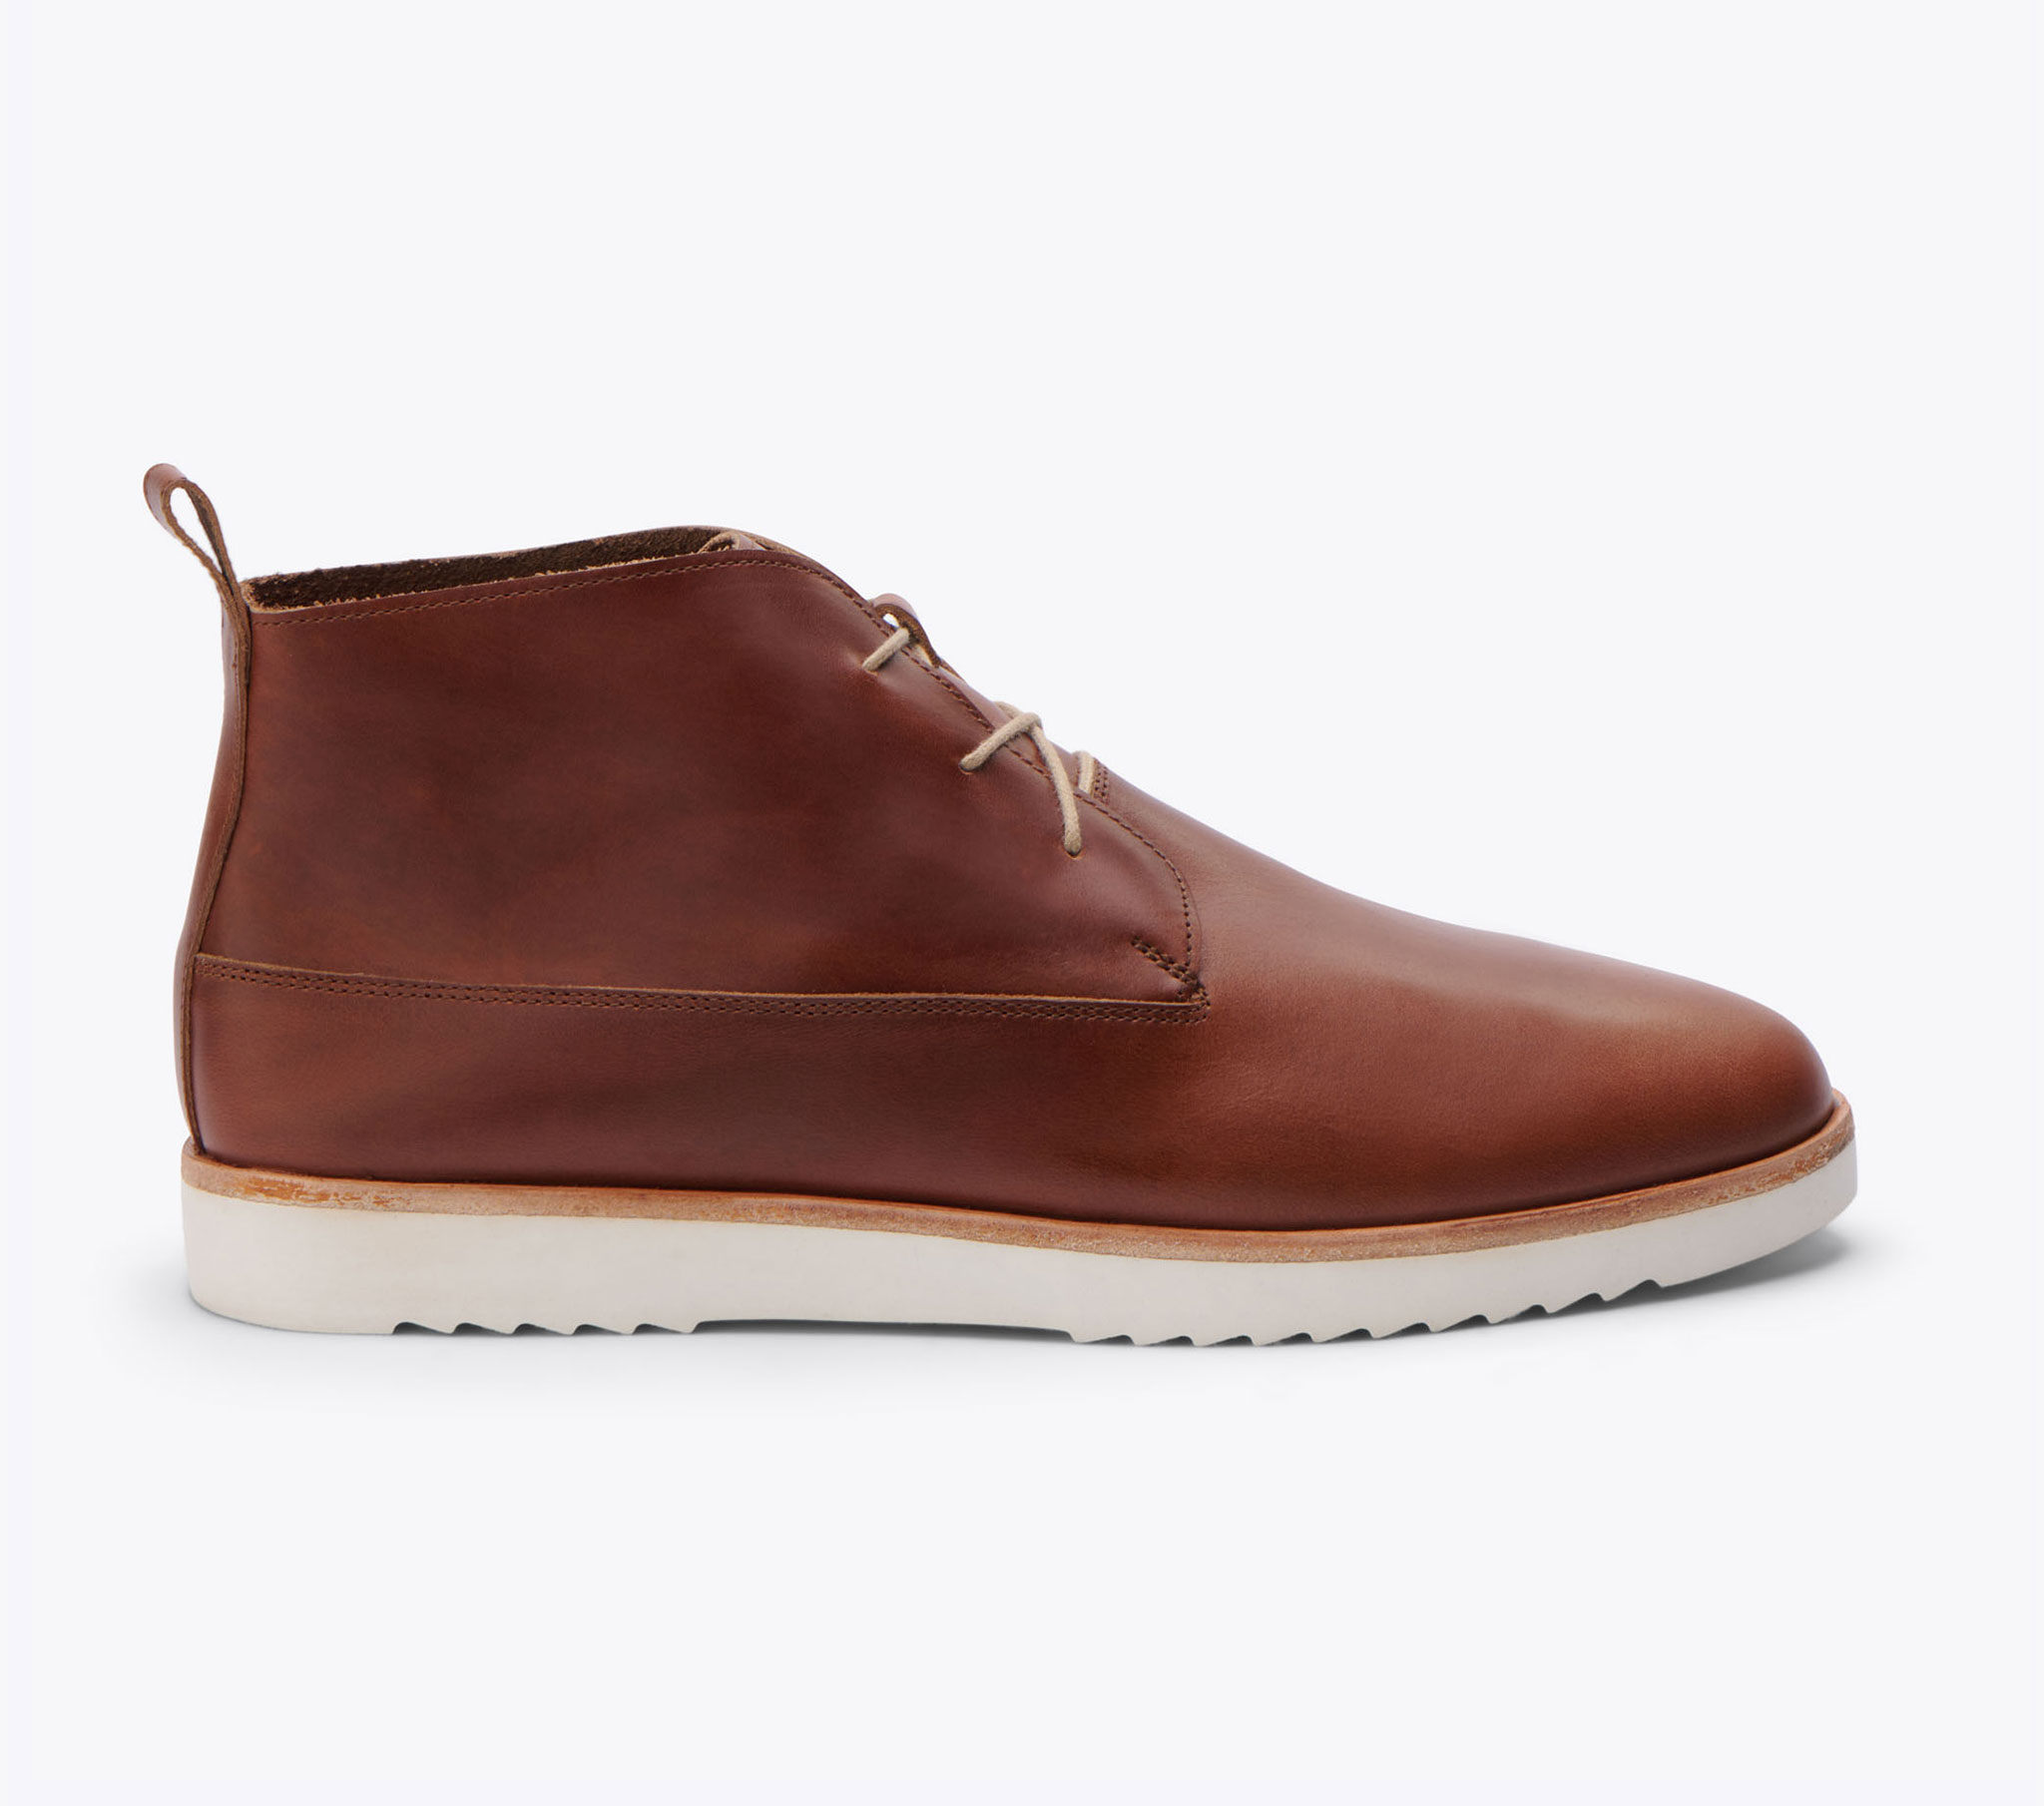 Nisolo Cusco Flex Chukka Brandy - Every Nisolo product is built on the foundation of comfort, function, and design. 